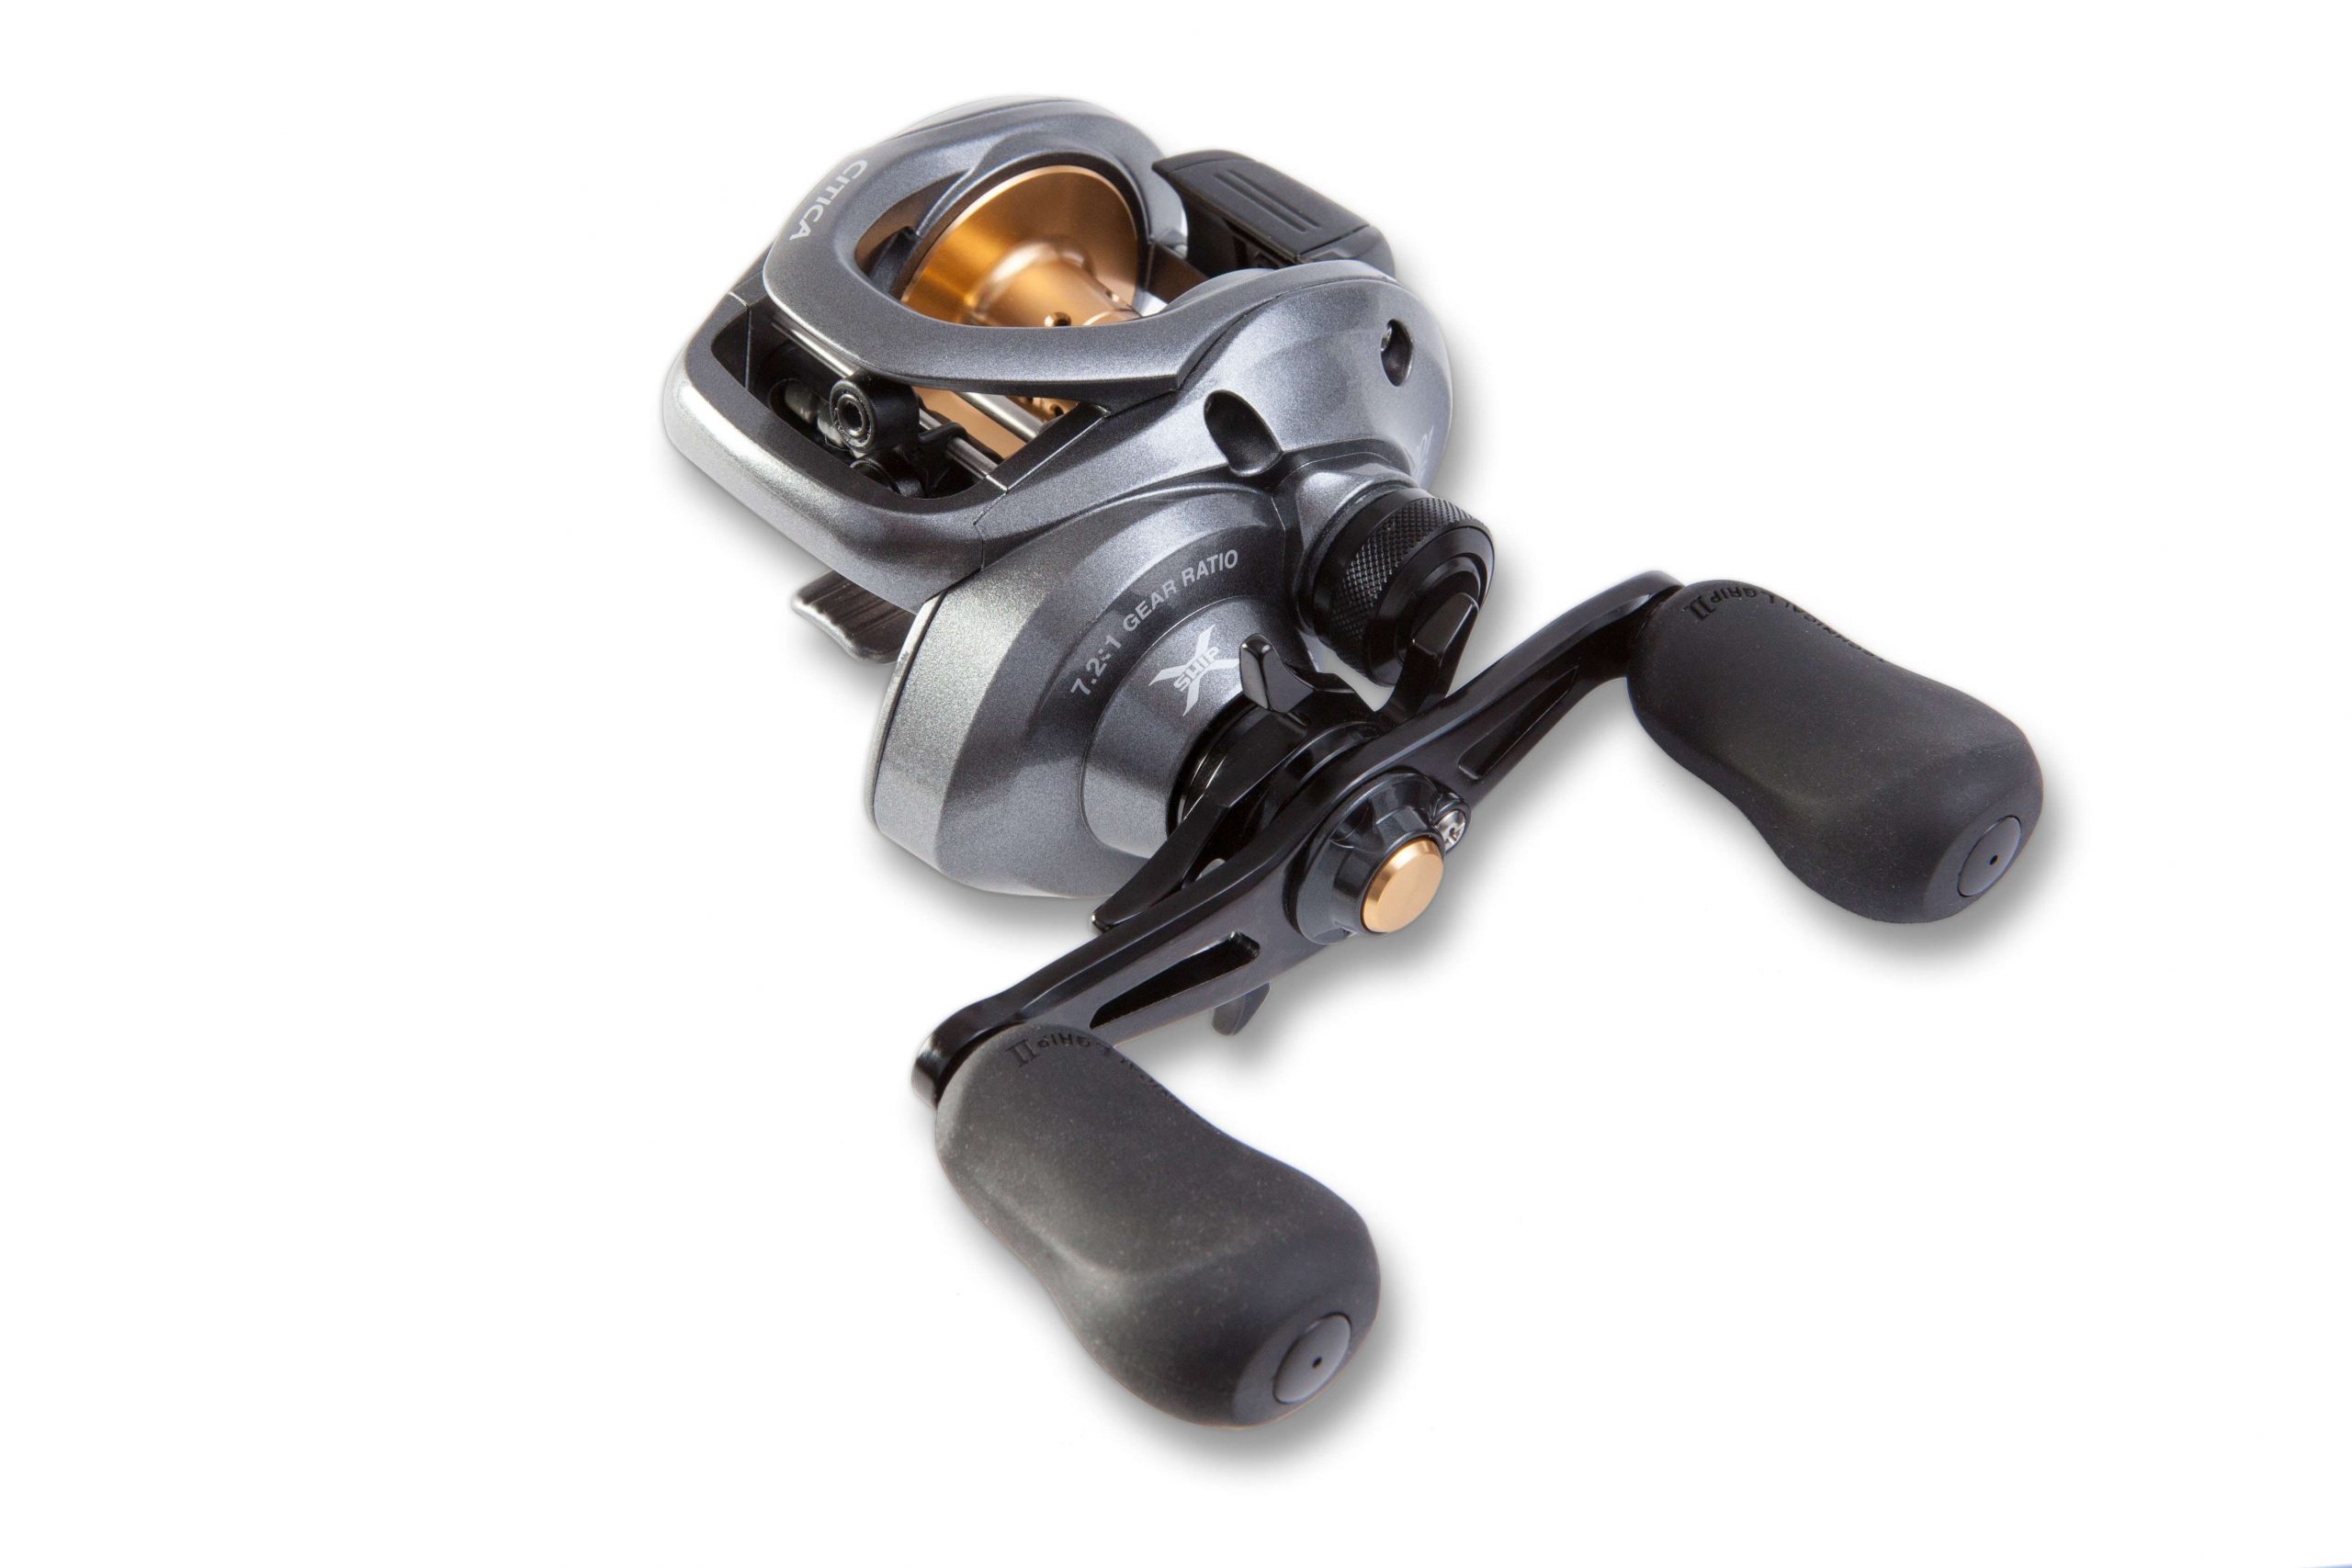 <b>Shimano</b><br>	Citica 200<br>	 		A new affordable baitcasting reel from Shimano, the Citica 200 features a tough 'Hagane' body, X-Ship technology for smooth retrieves increased balance and reduced vibration. Comes in 7.2:1 and 6.3:1 gear ratios, and there's left handed versions (pictured) available too. 